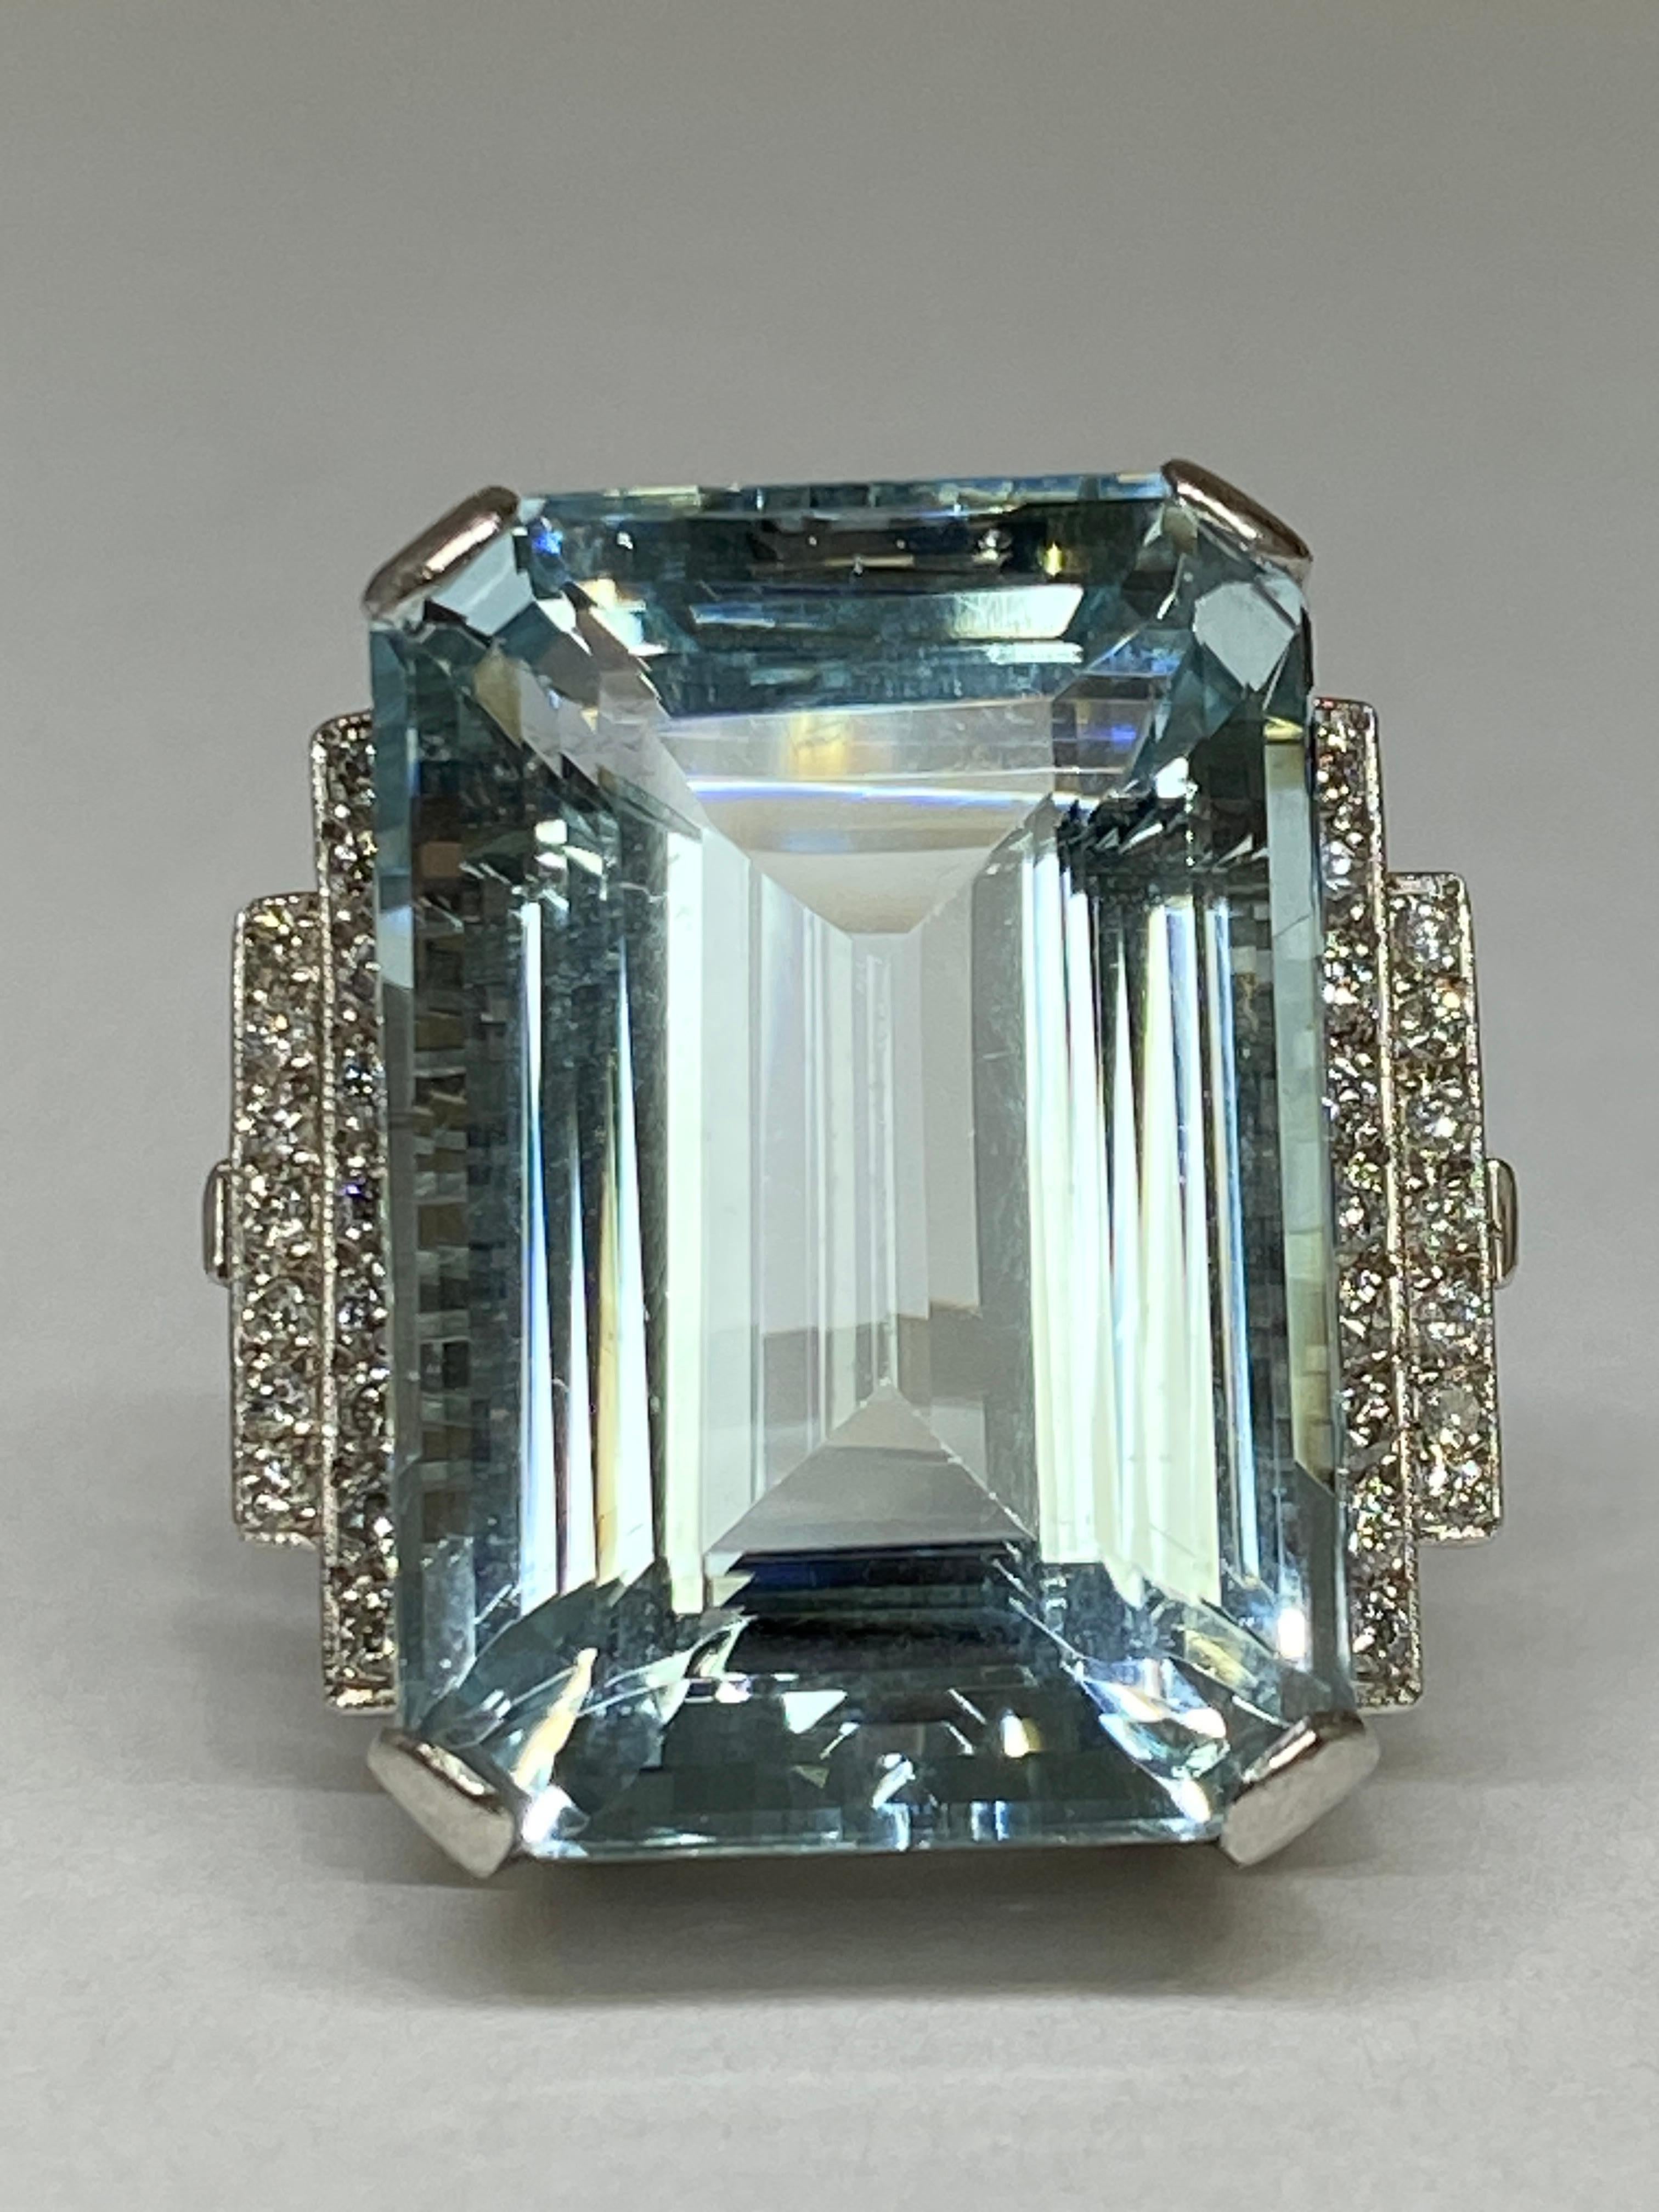 Take a dive into this spectacular crystalline blue aquamarine adorning your finger!  Weighing in at show stopping 38.72carats, the elegantly proportioned emerald-cut aquamarine glistens, gleams, and glows in high profile. Accented at the shoulder